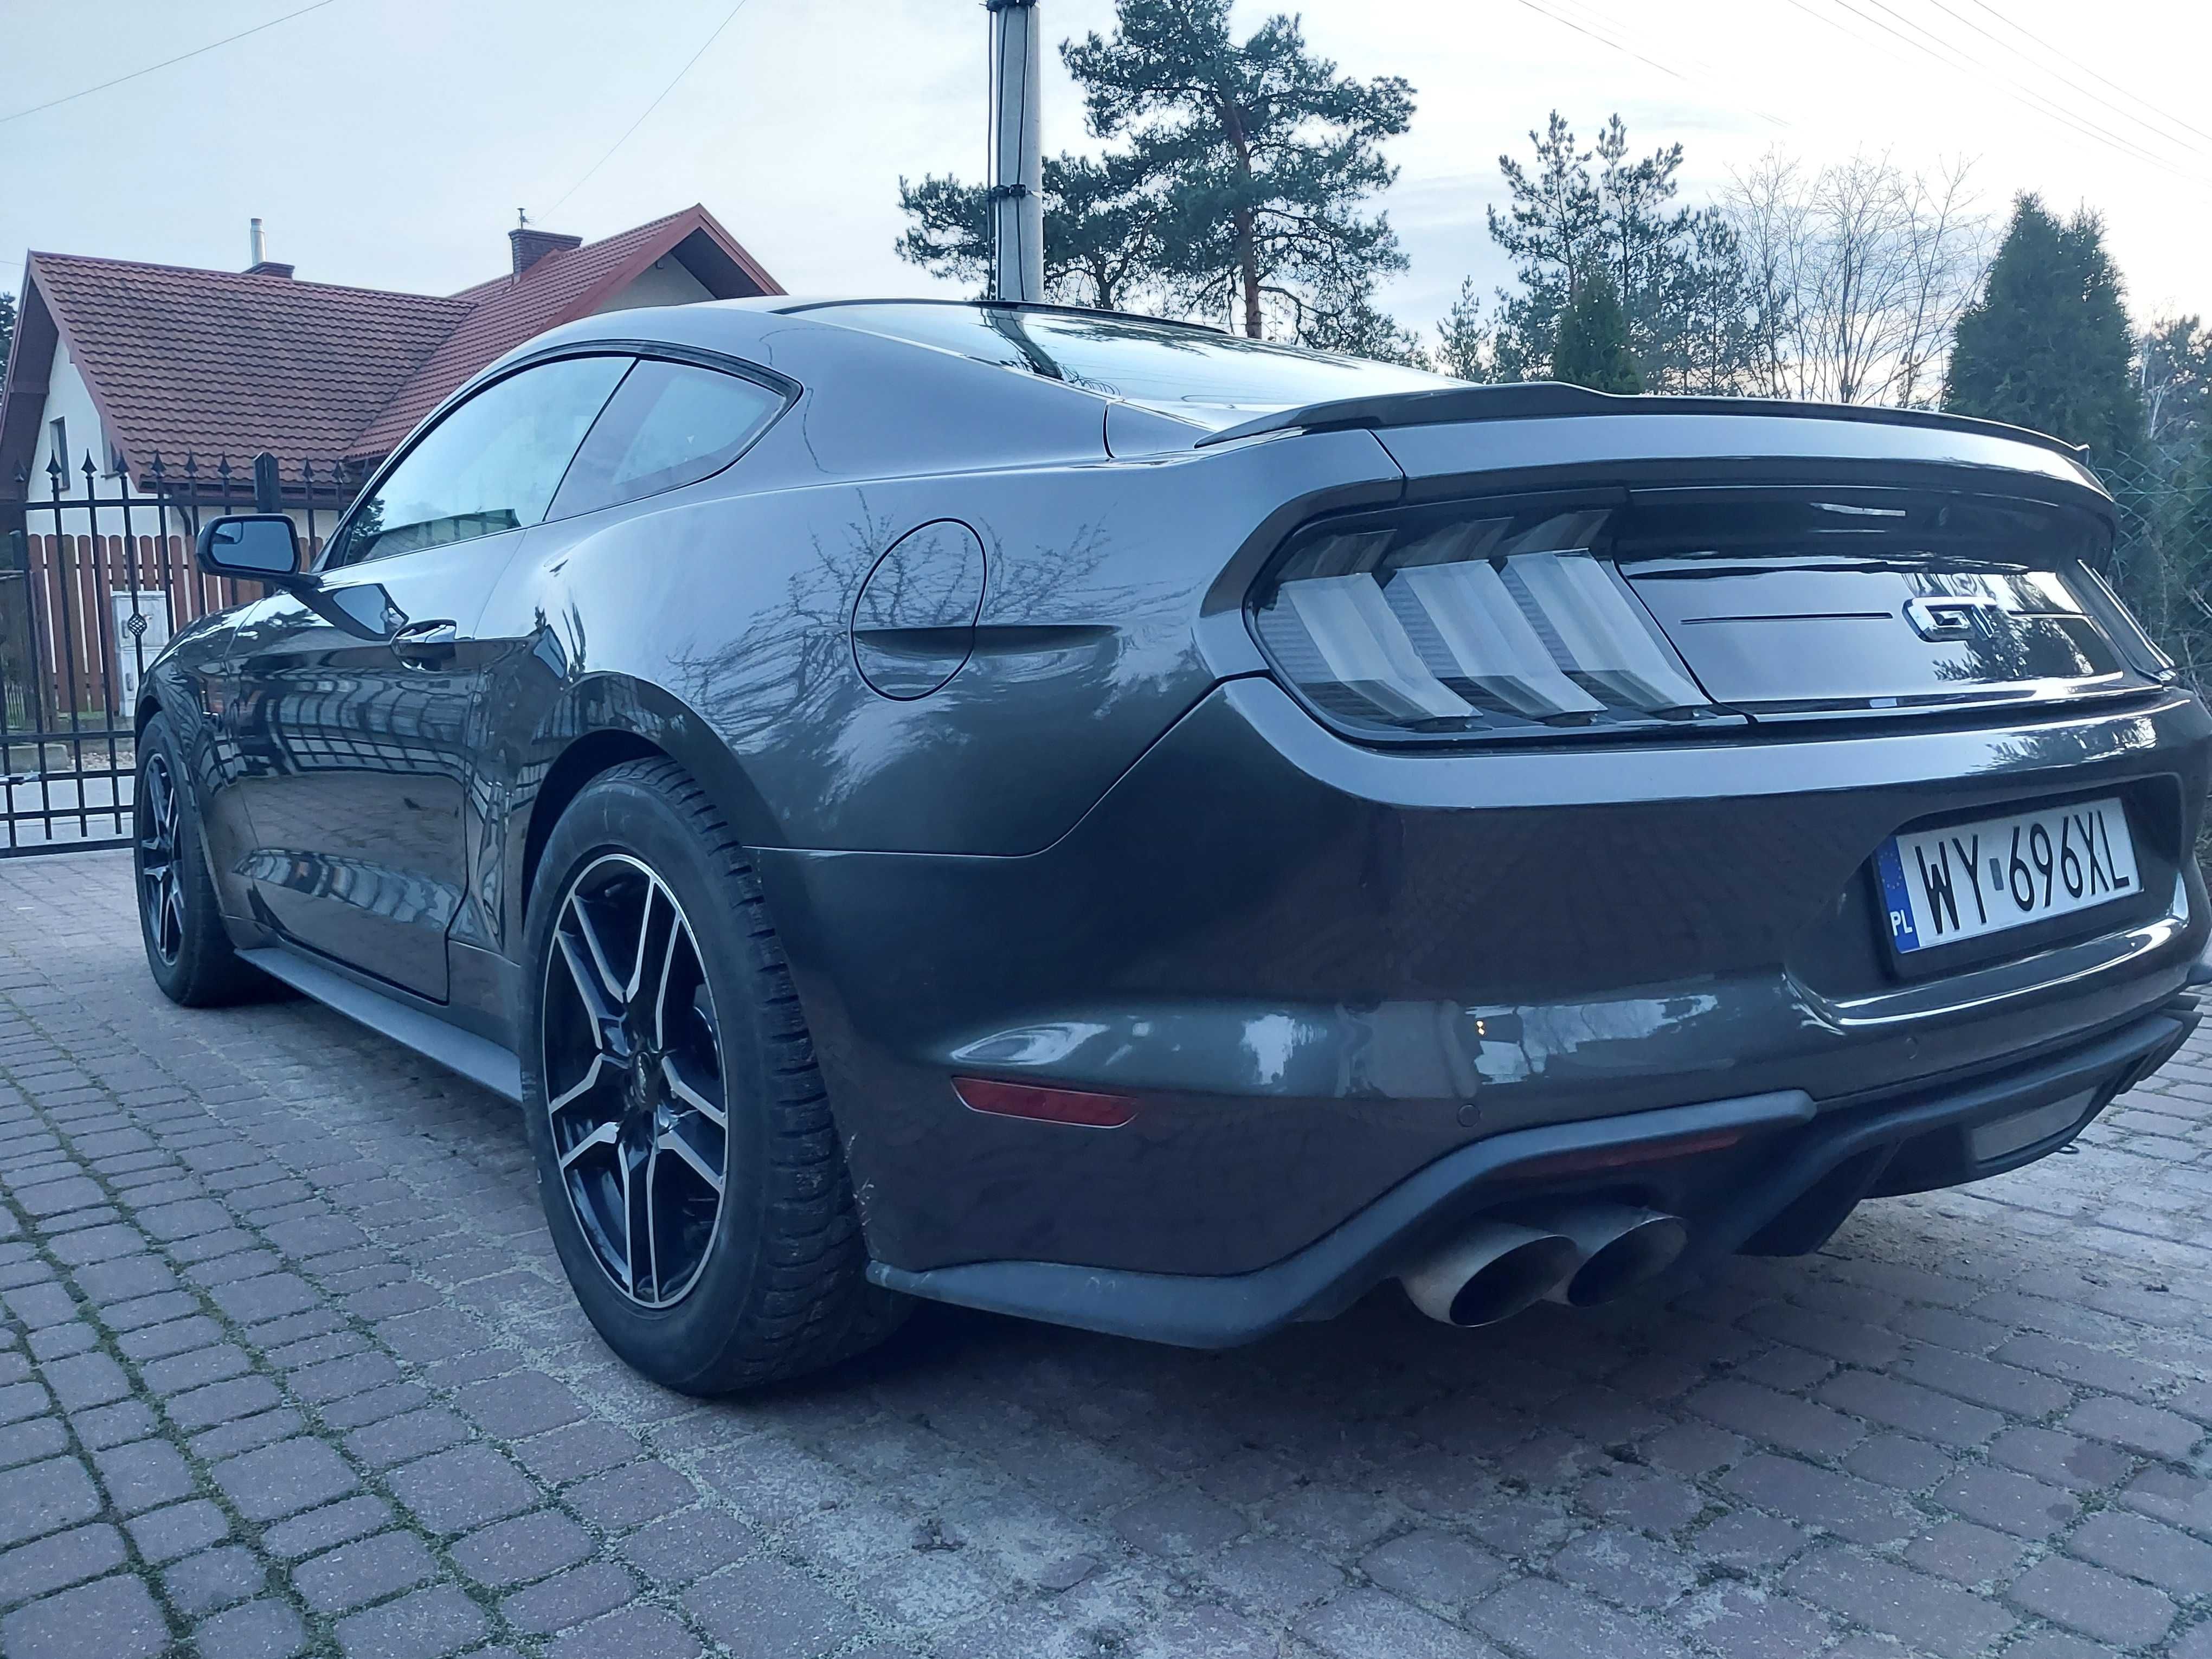 Ford Mustang GT 5.0 manual